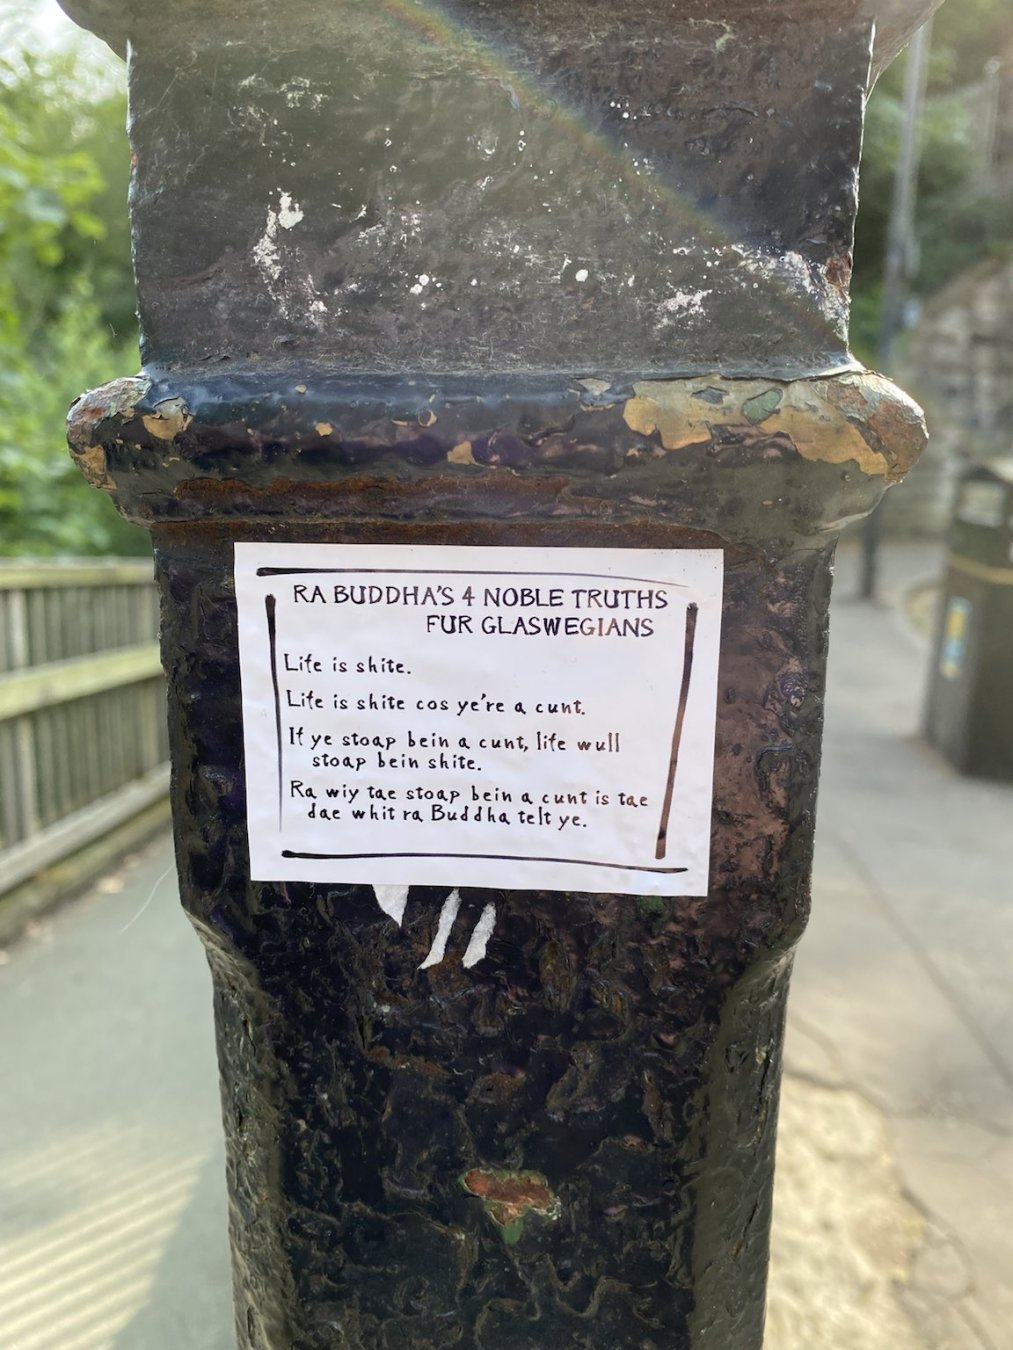 Sticker in a city park with the Buddhist 4 Noble Truths rendered in Glaswegian Scots